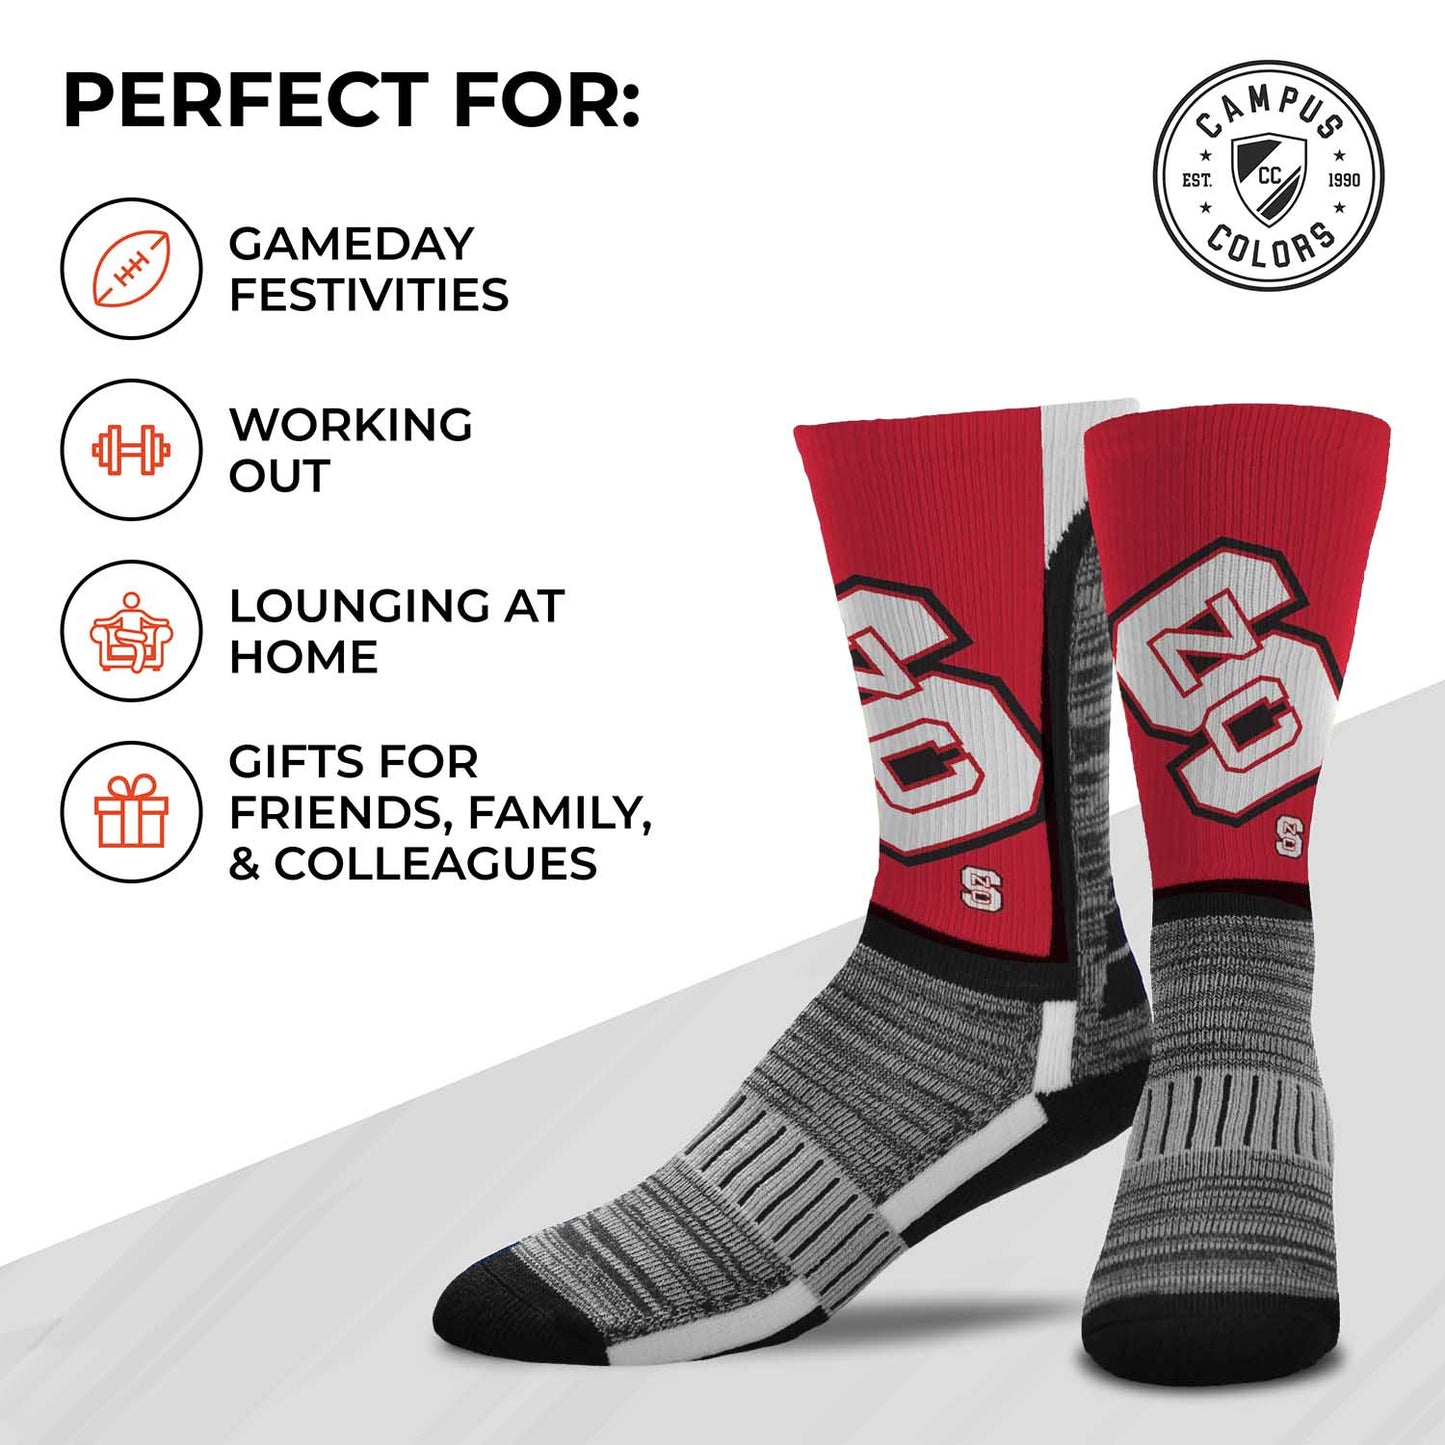 NC State Wolfpack NCAA Adult State and University Crew Socks - Red